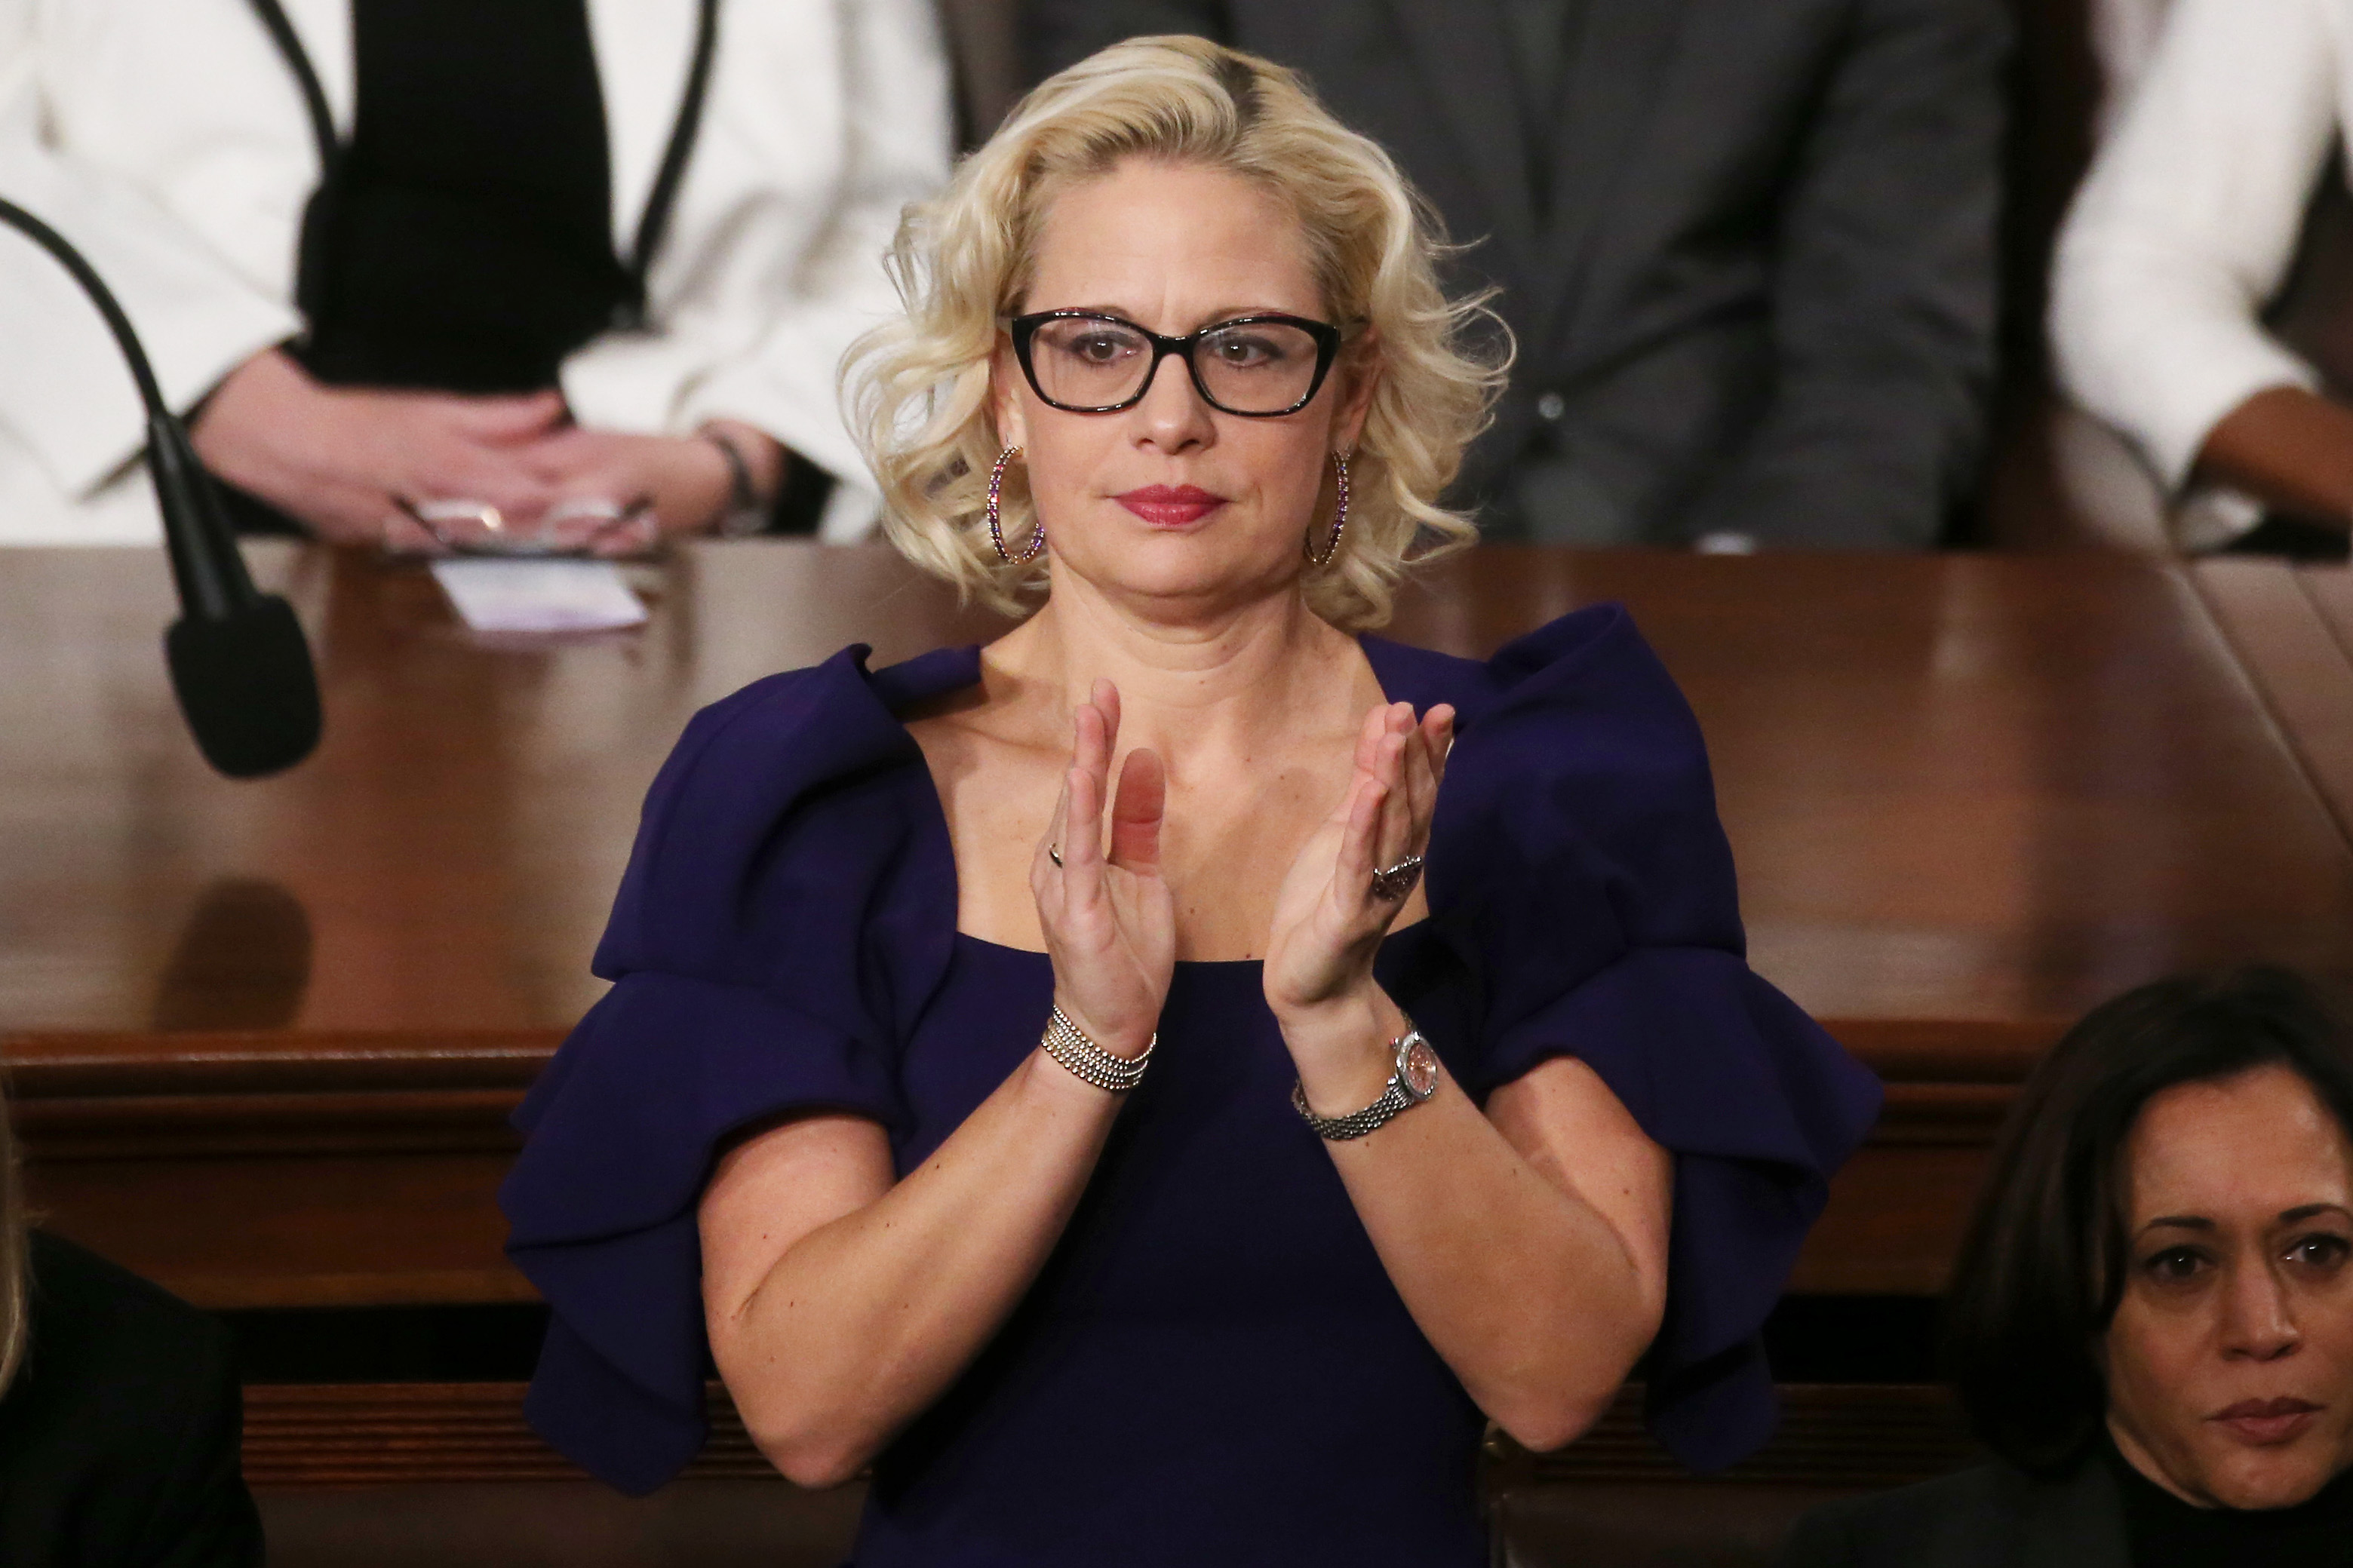 Kyrsten Sinema’s team suggests that she criticizes her negative vote “no” is sexist